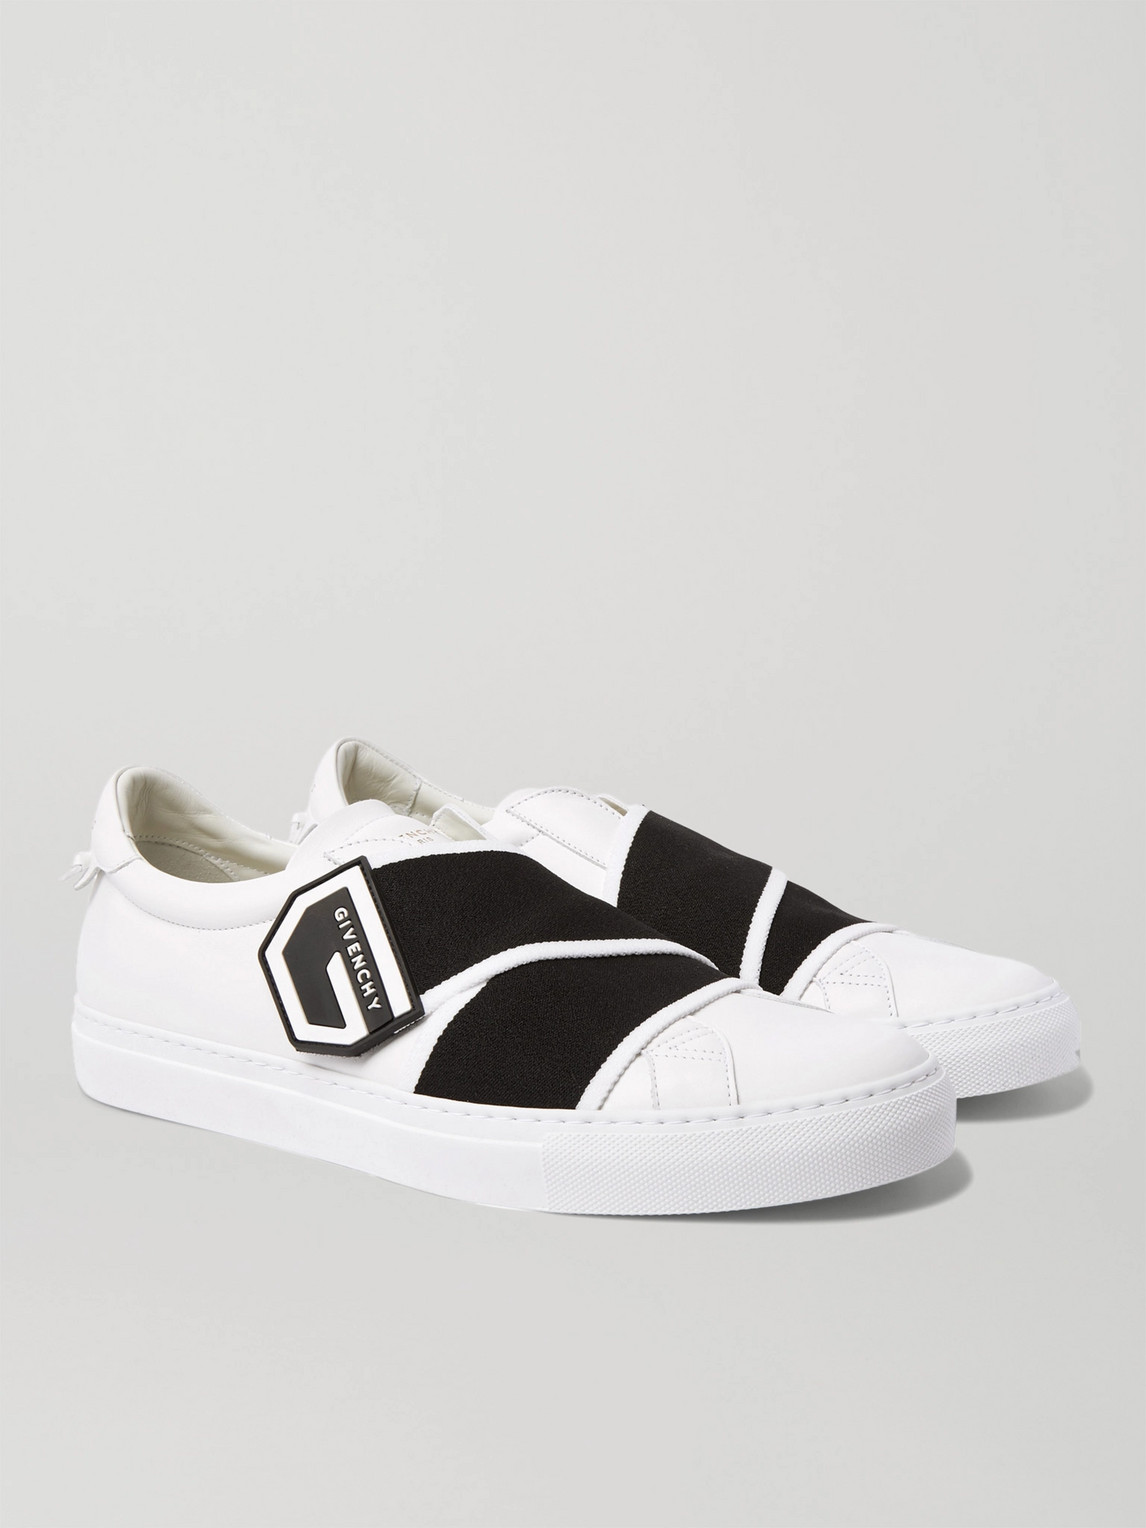 GIVENCHY URBAN STREET LOGO-PRINT LEATHER trainers